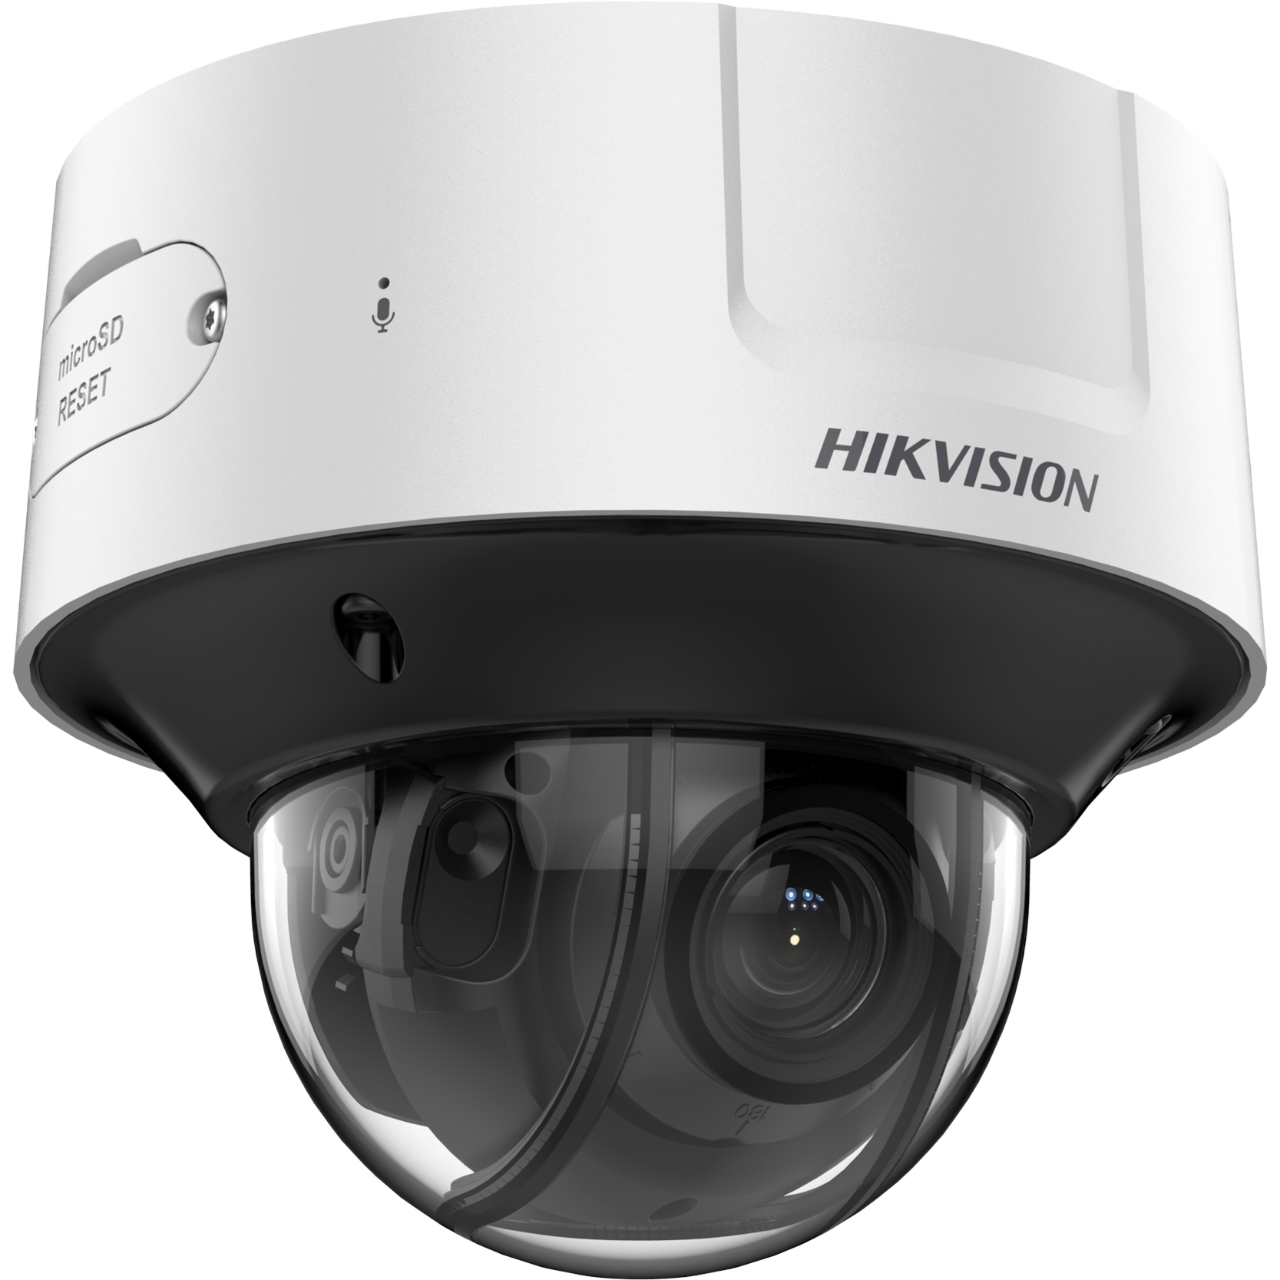 HIKVISION iDS-2CD7546G0-IZHS / 4Mpx 2.8-12mm